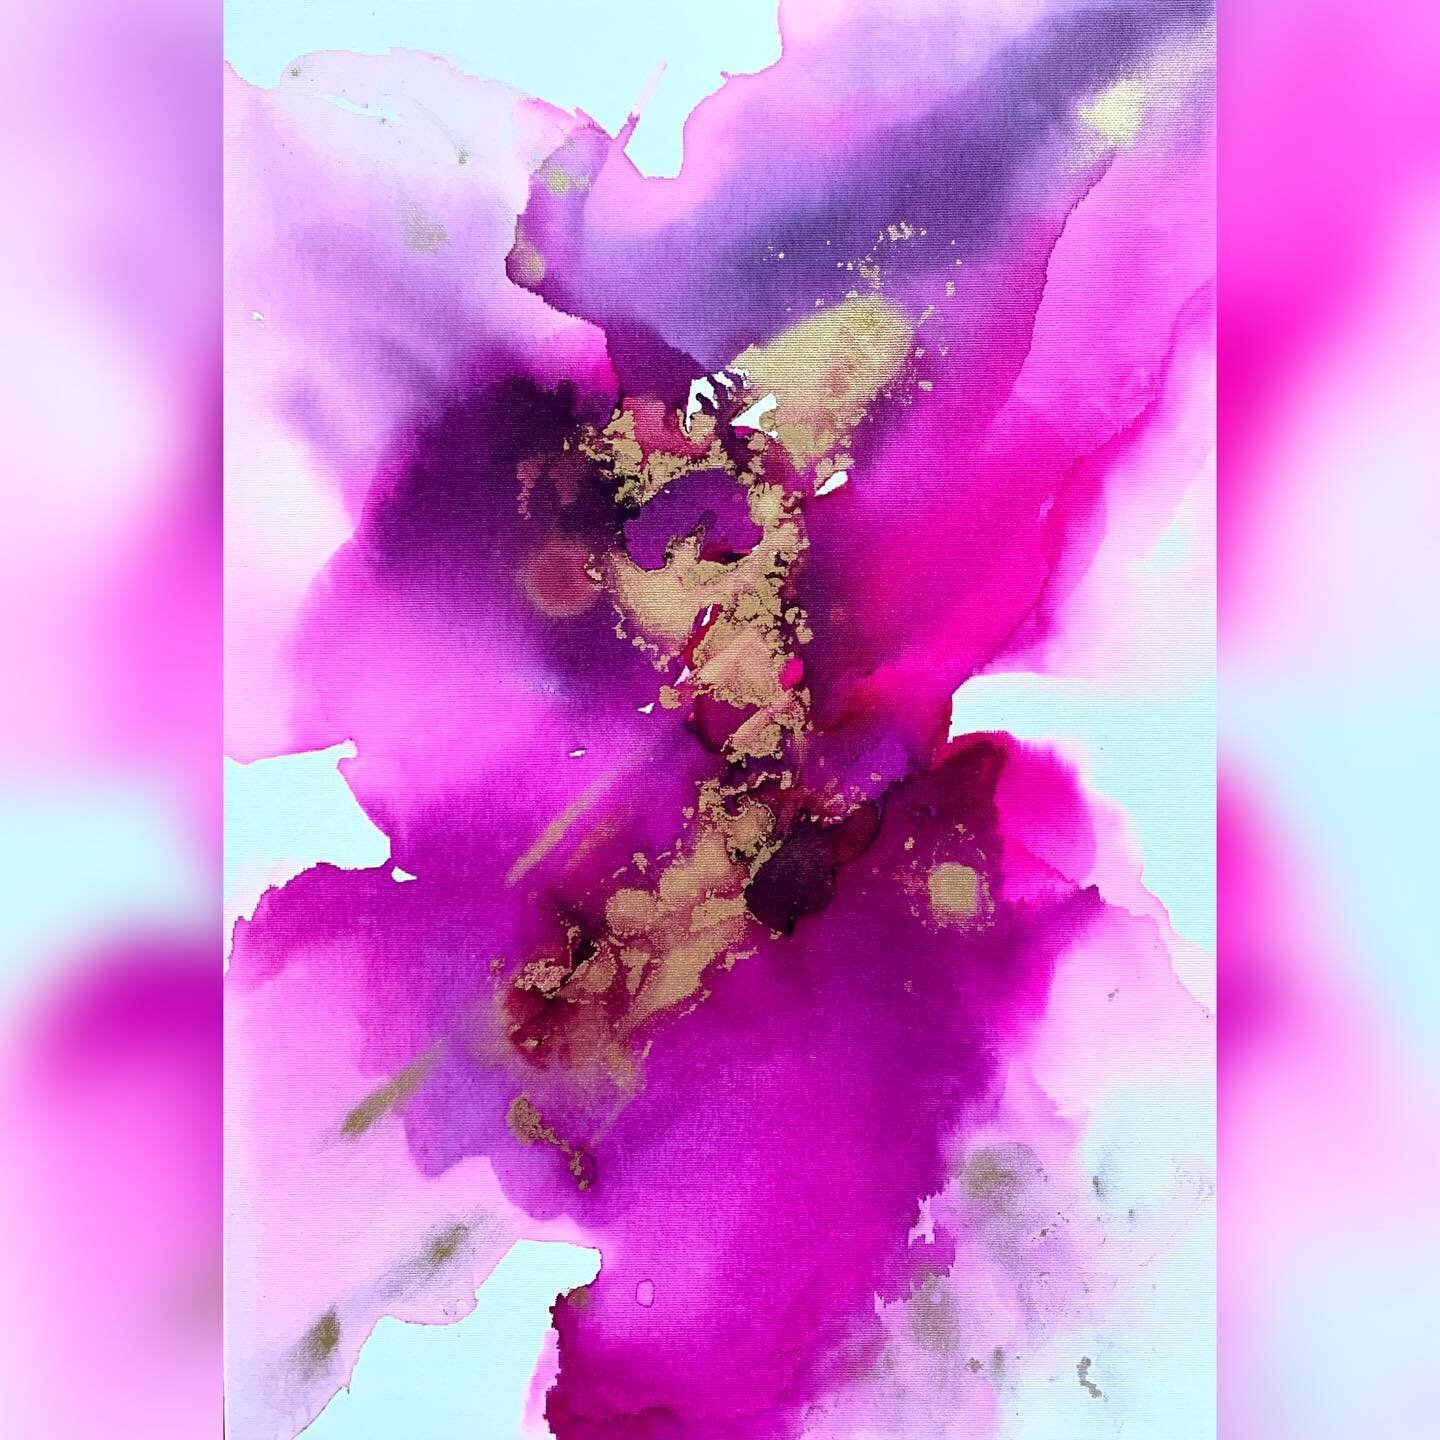 And here it is! &ldquo;Weeping orchids&rdquo;. Alcohol ink on an A3 primed canvas board. A few layers of varnish and the colors come to life even more. #alcoholink #alcoholinkartist #copicink #artdailydose #aspiringartist #zugart #artinswitzerland #s